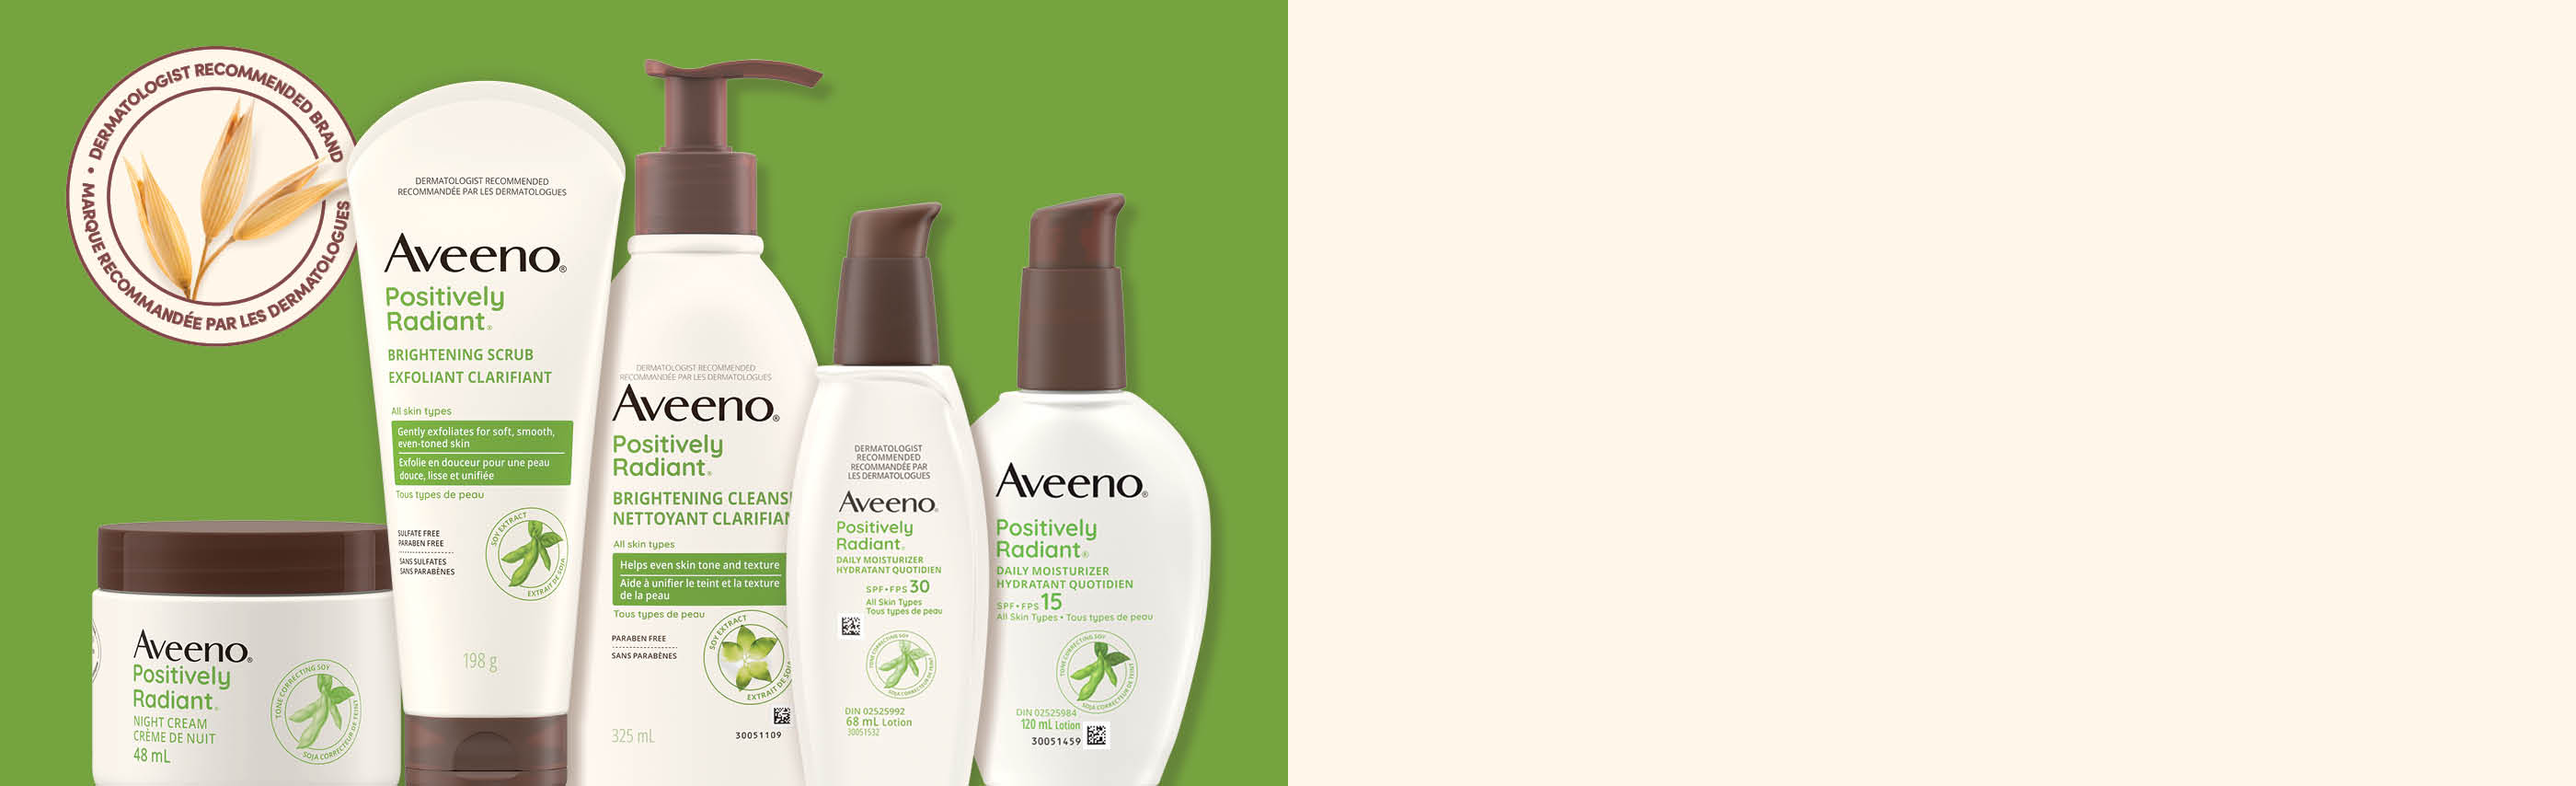 Banner including five Aveeno® Positively Radiant Skin Care Products with a logo stating "Dermatologist Recommended".